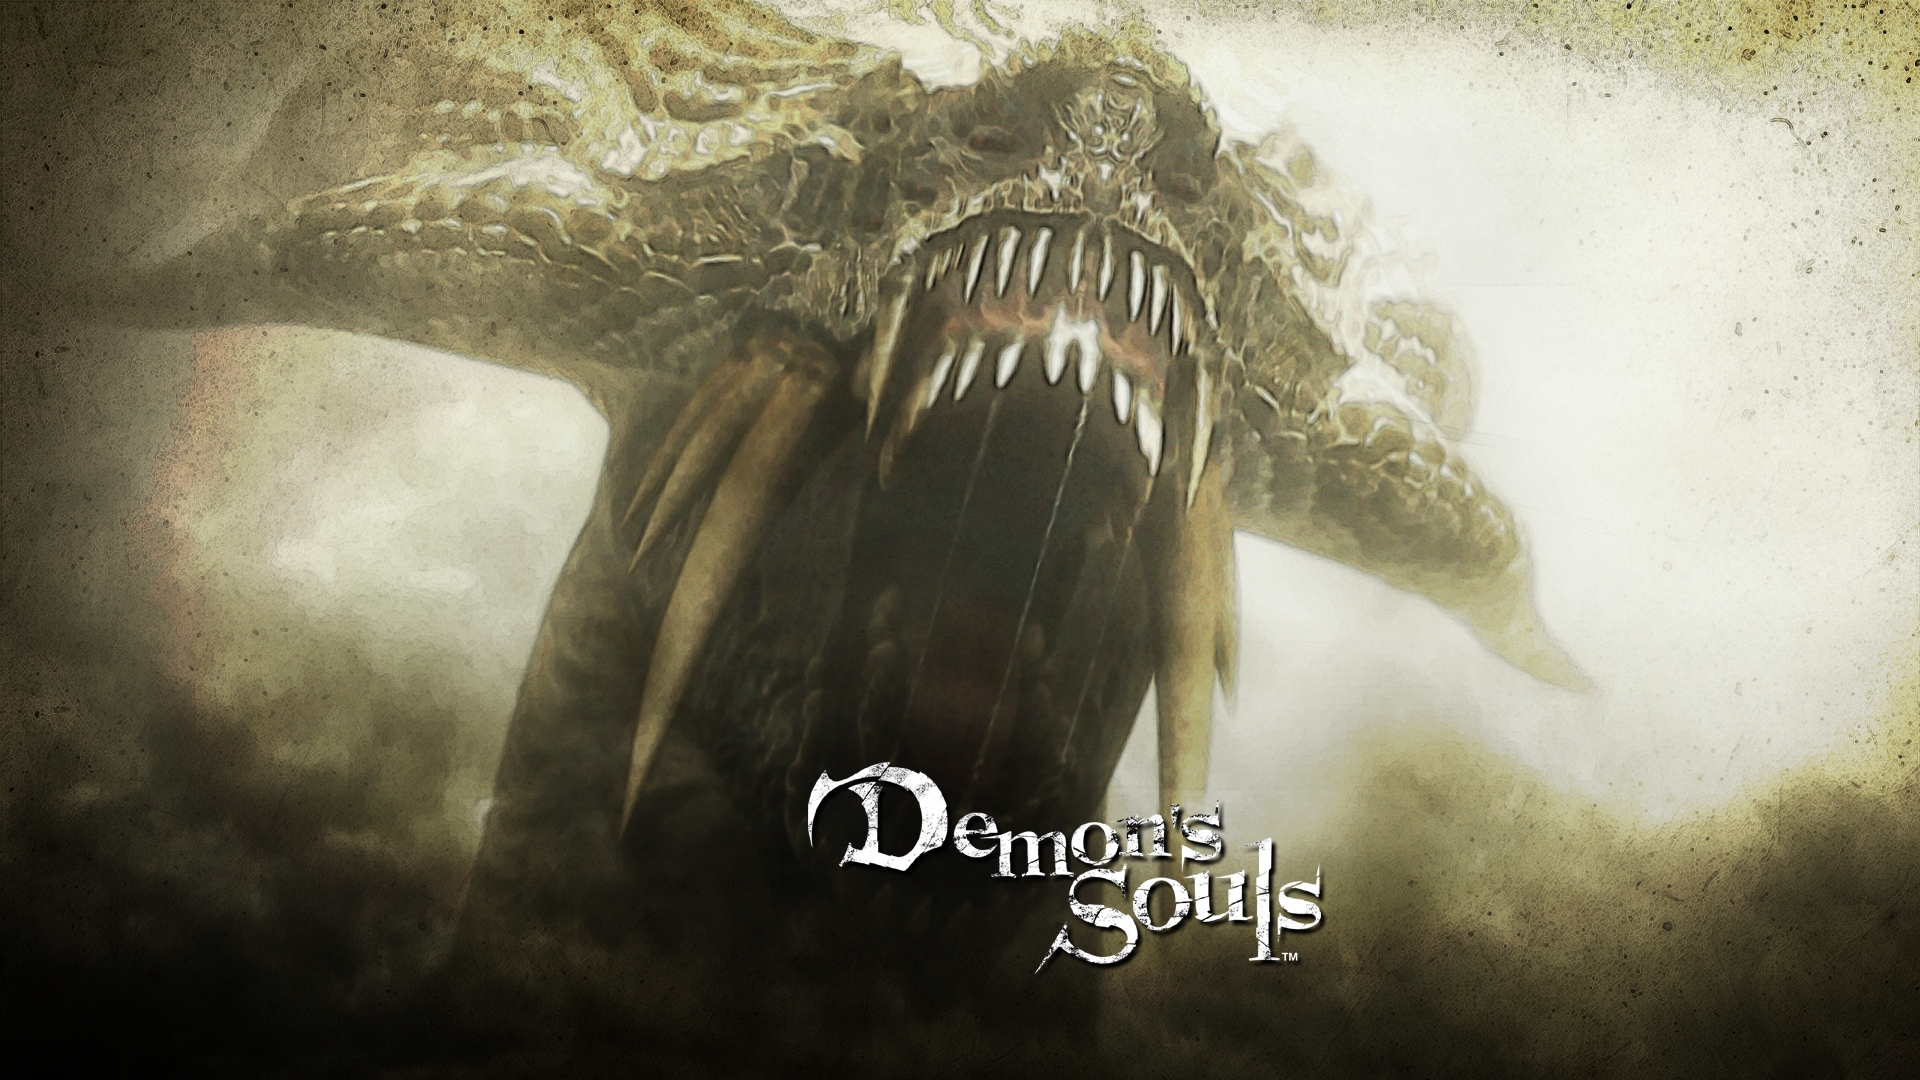 Wallpaper Of Demons Souls You Are Ing